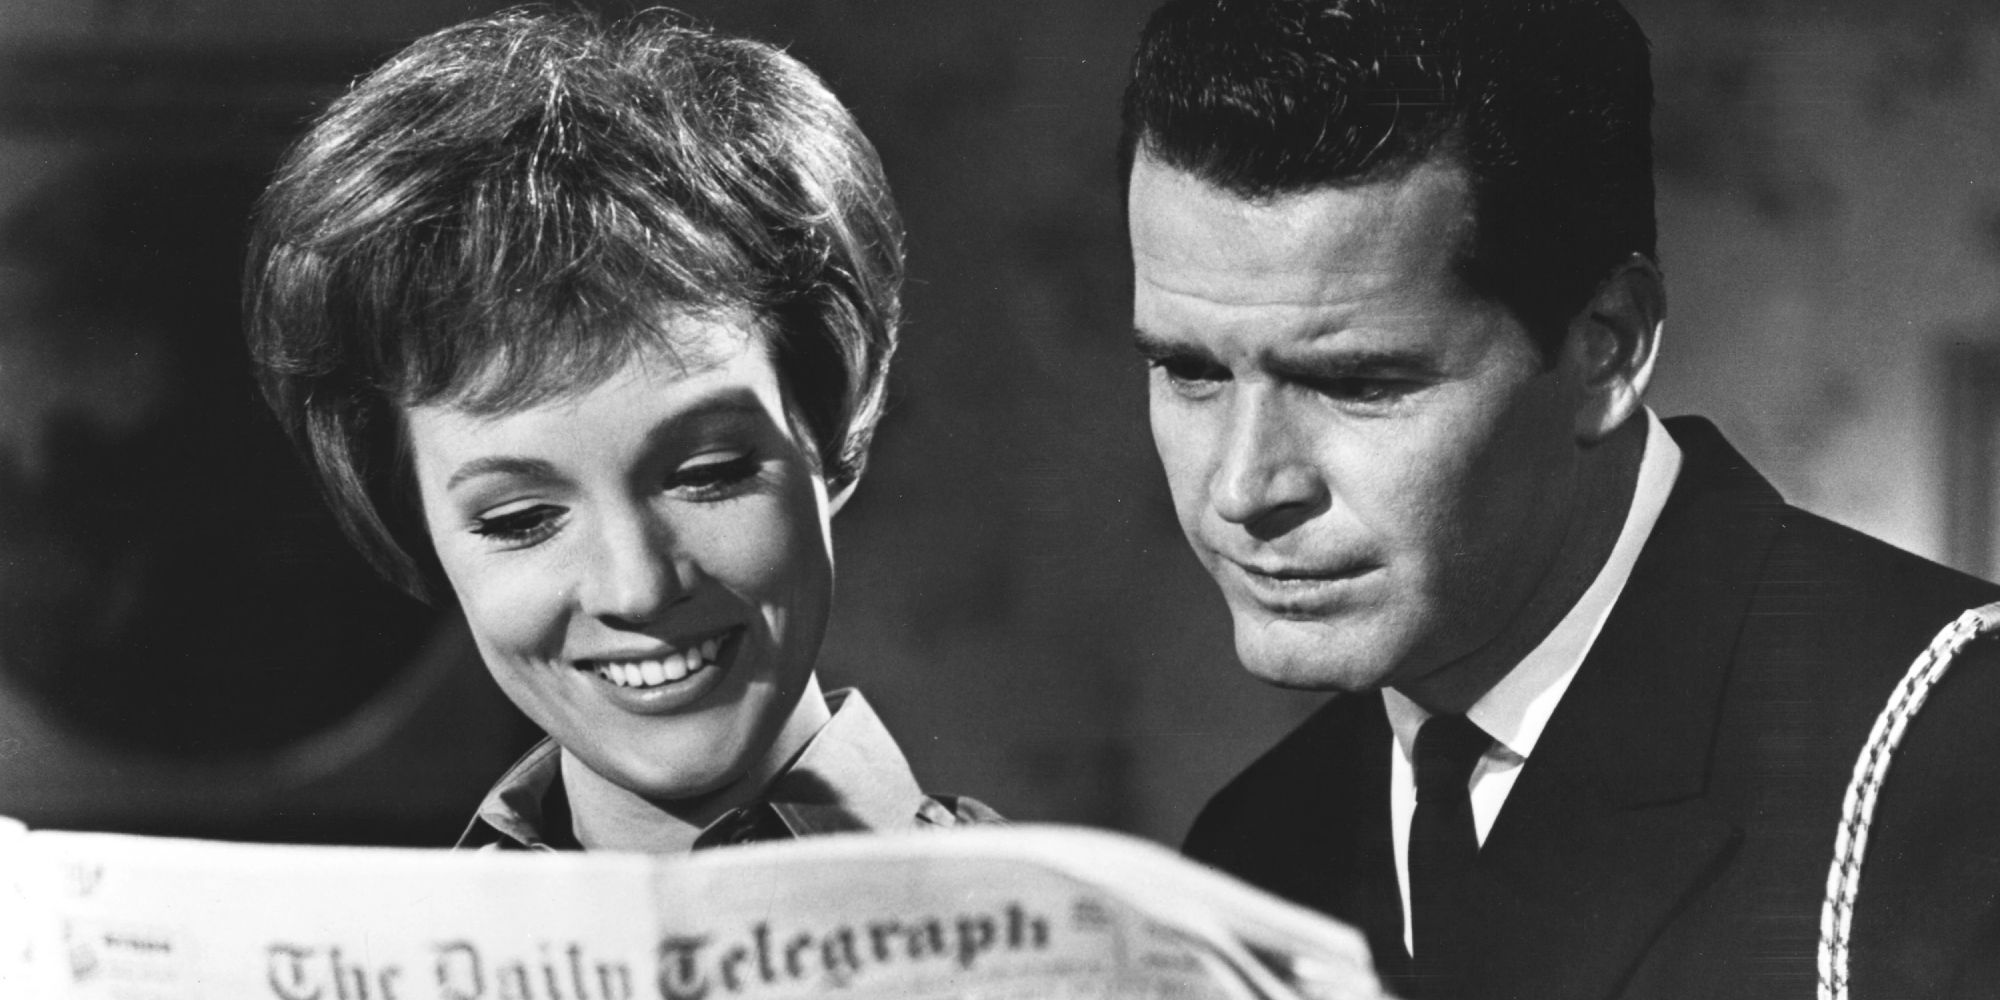 James Garner and Julie Andrews reading The Daily Telegraph in The Americanization of Emily.